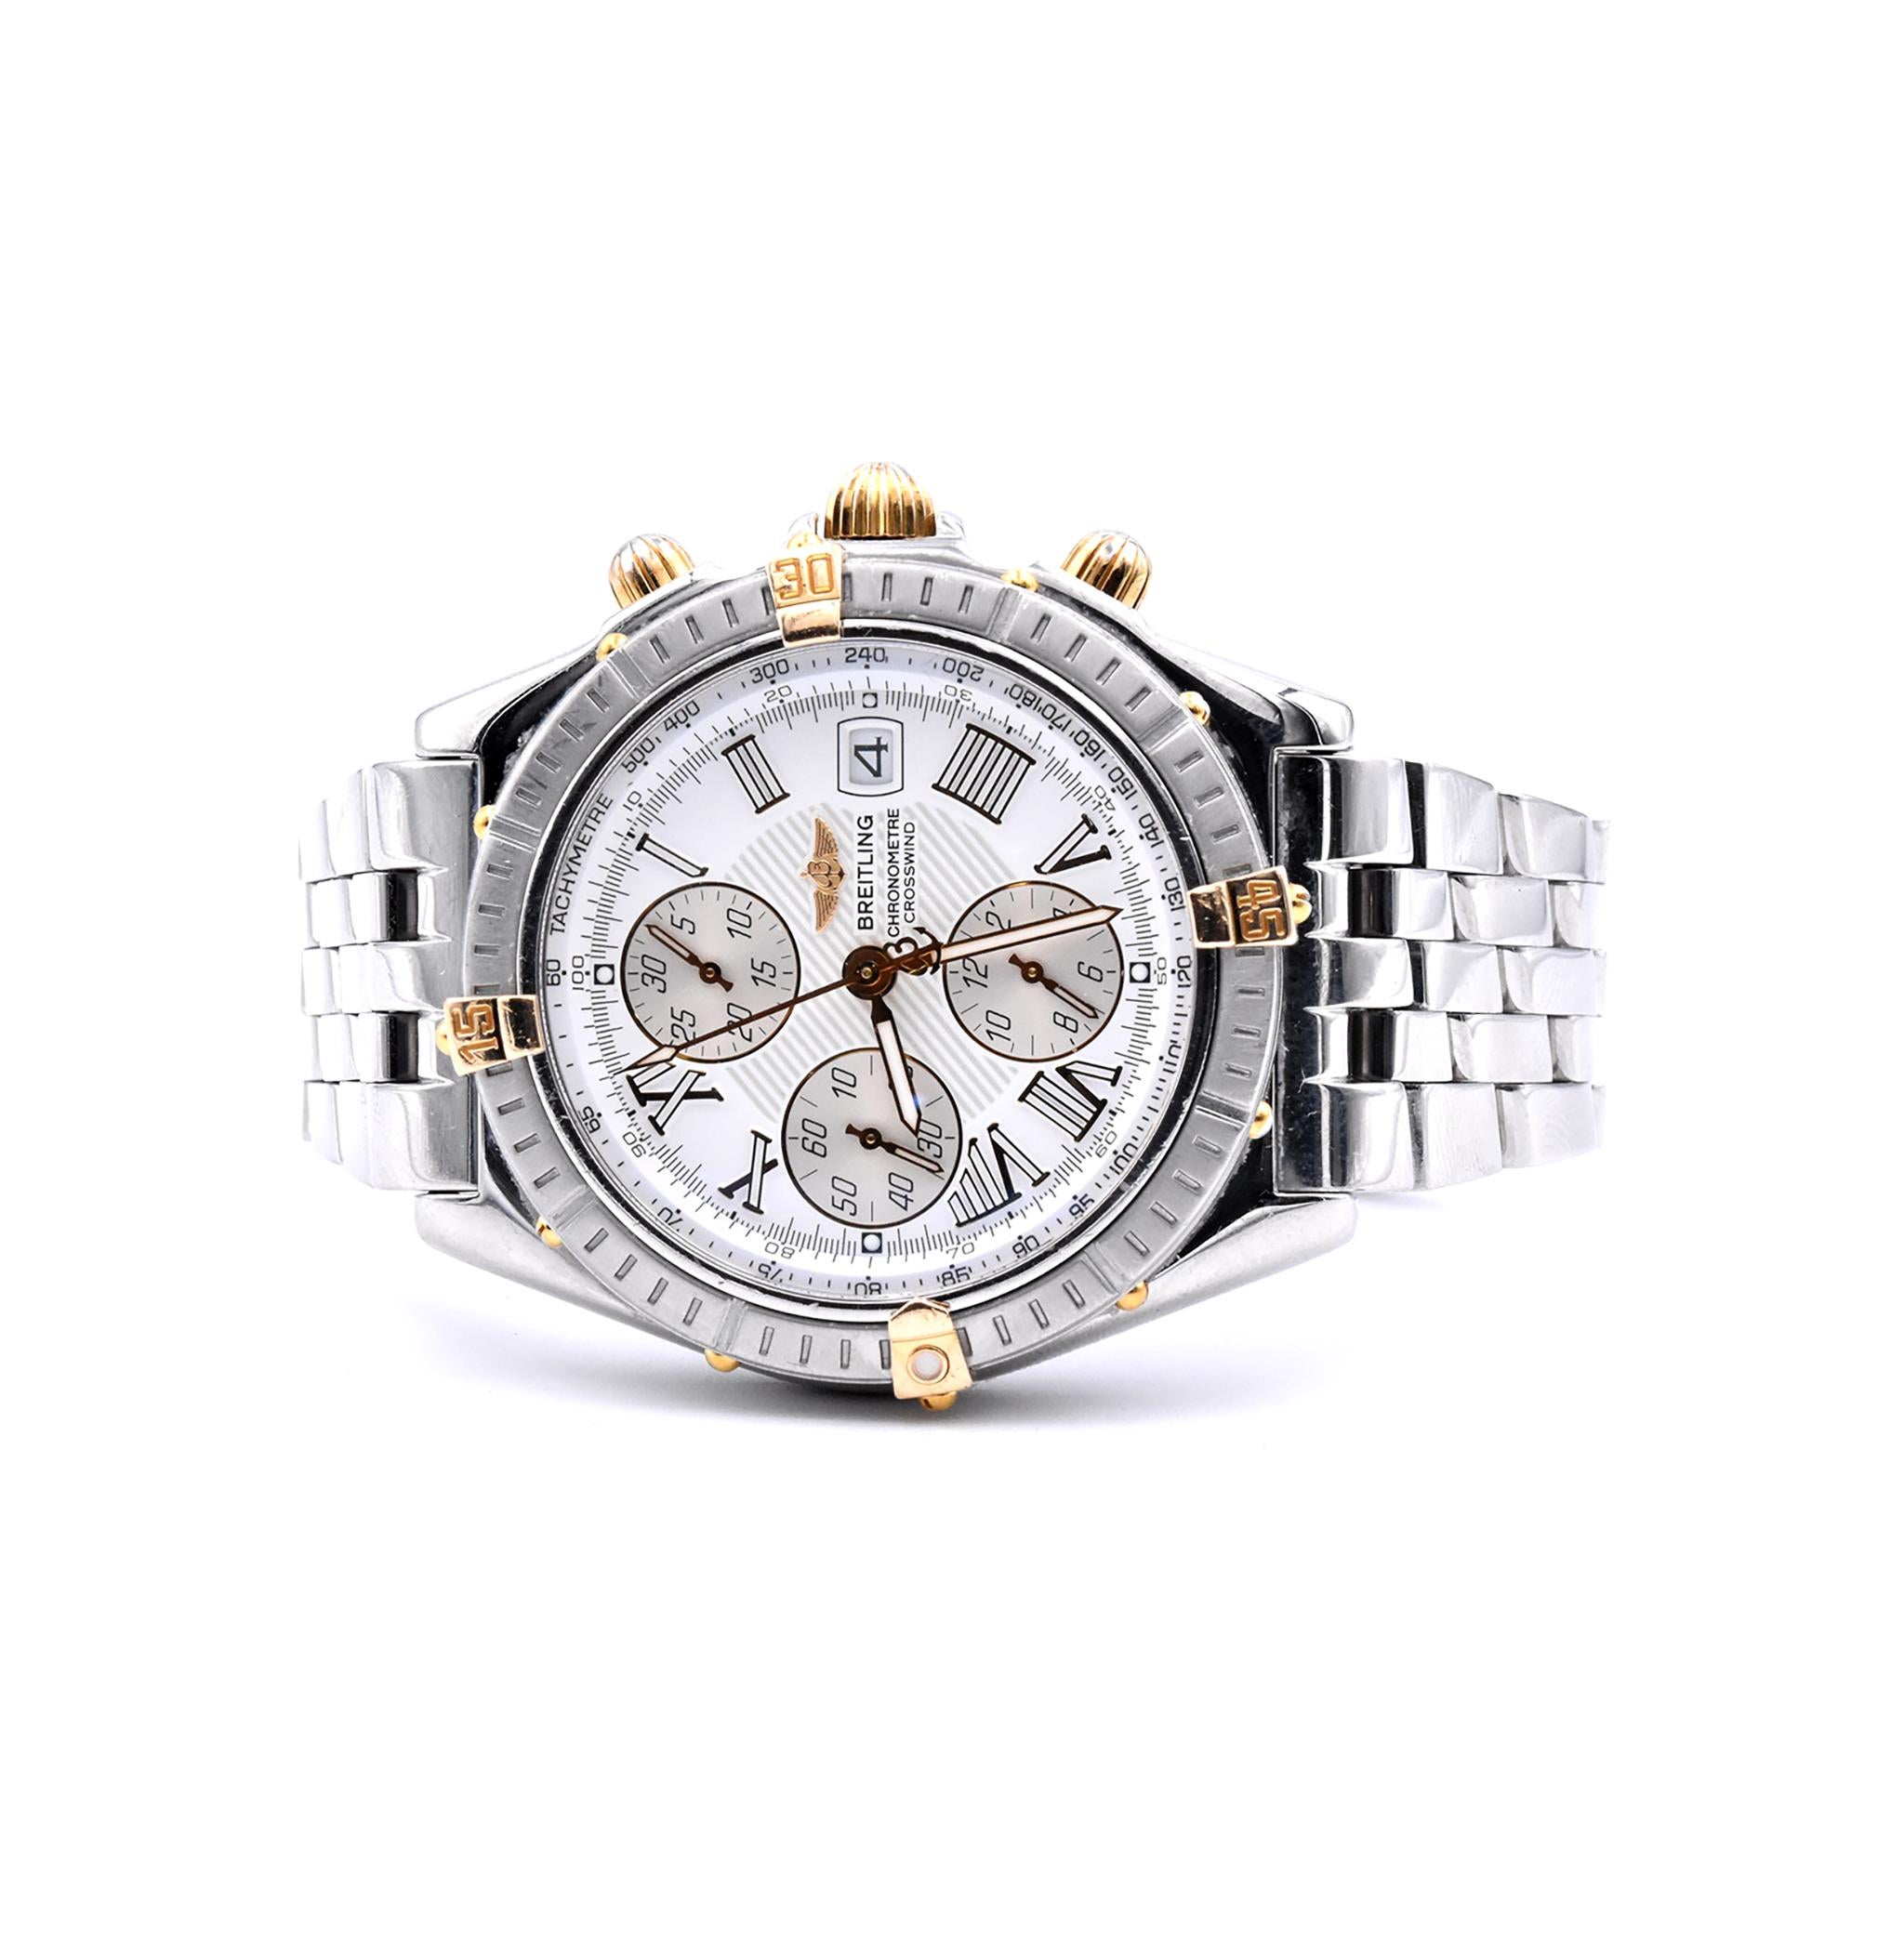 Designer: Breitling
Movement: automatic
Function: hours, minutes, small seconds, chronograph, date
Case: round 43mm stainless steel case, scratch resistant sapphire crystal, water resistant to 300m, gold bezel indicators, gold push/pull crown
Dial: